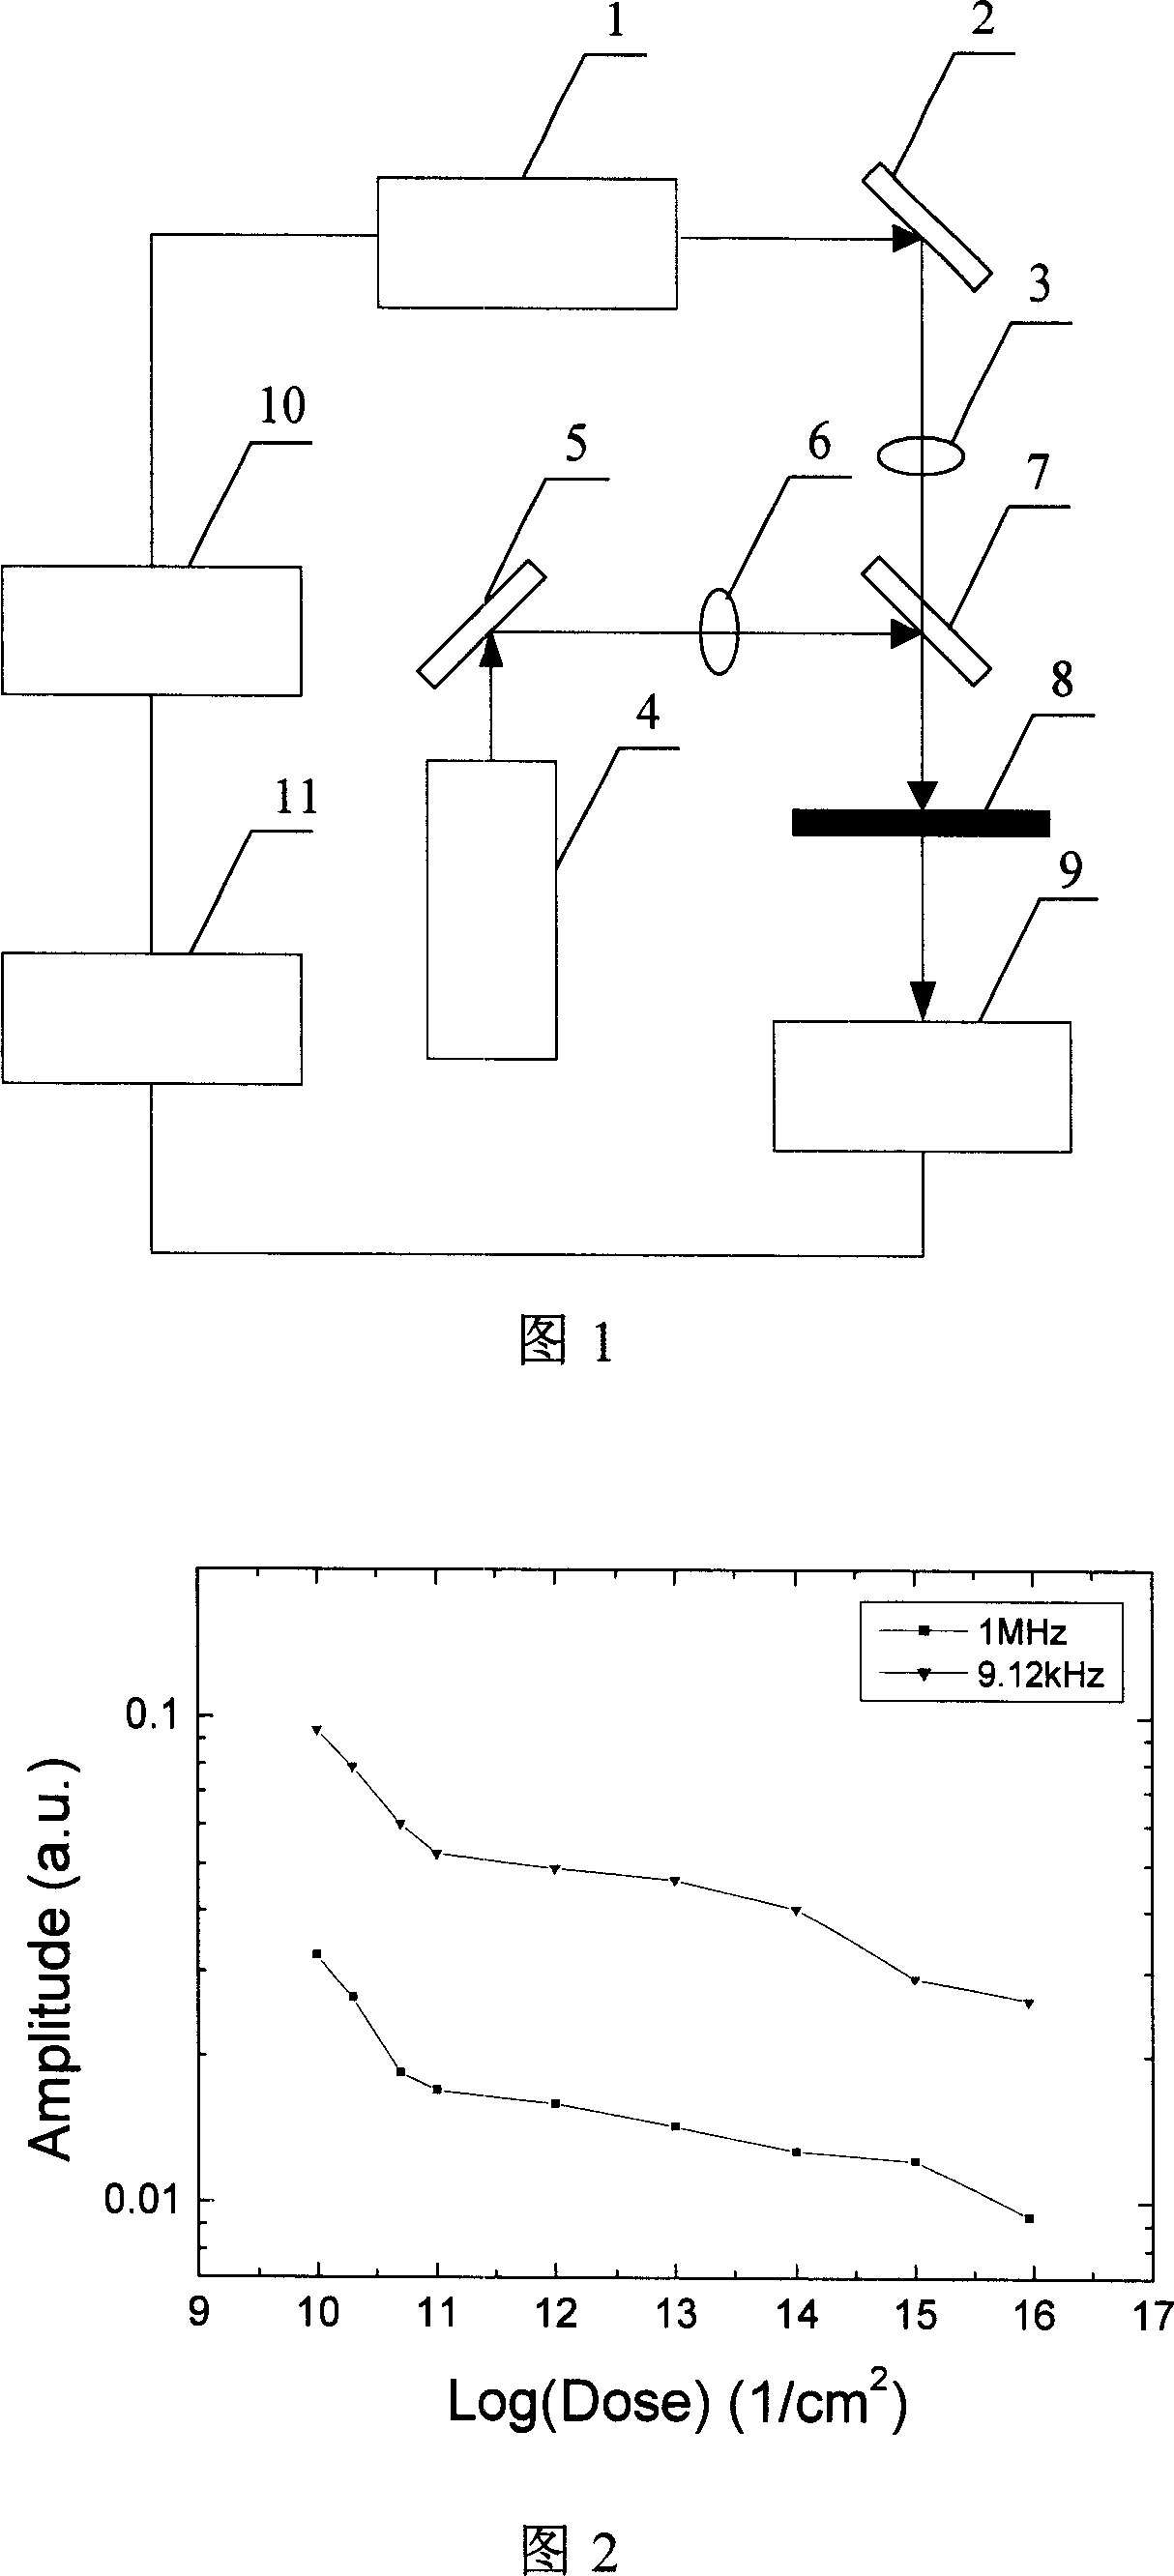 Method for measuring doping content of semiconductor based on free carrier absorption technique